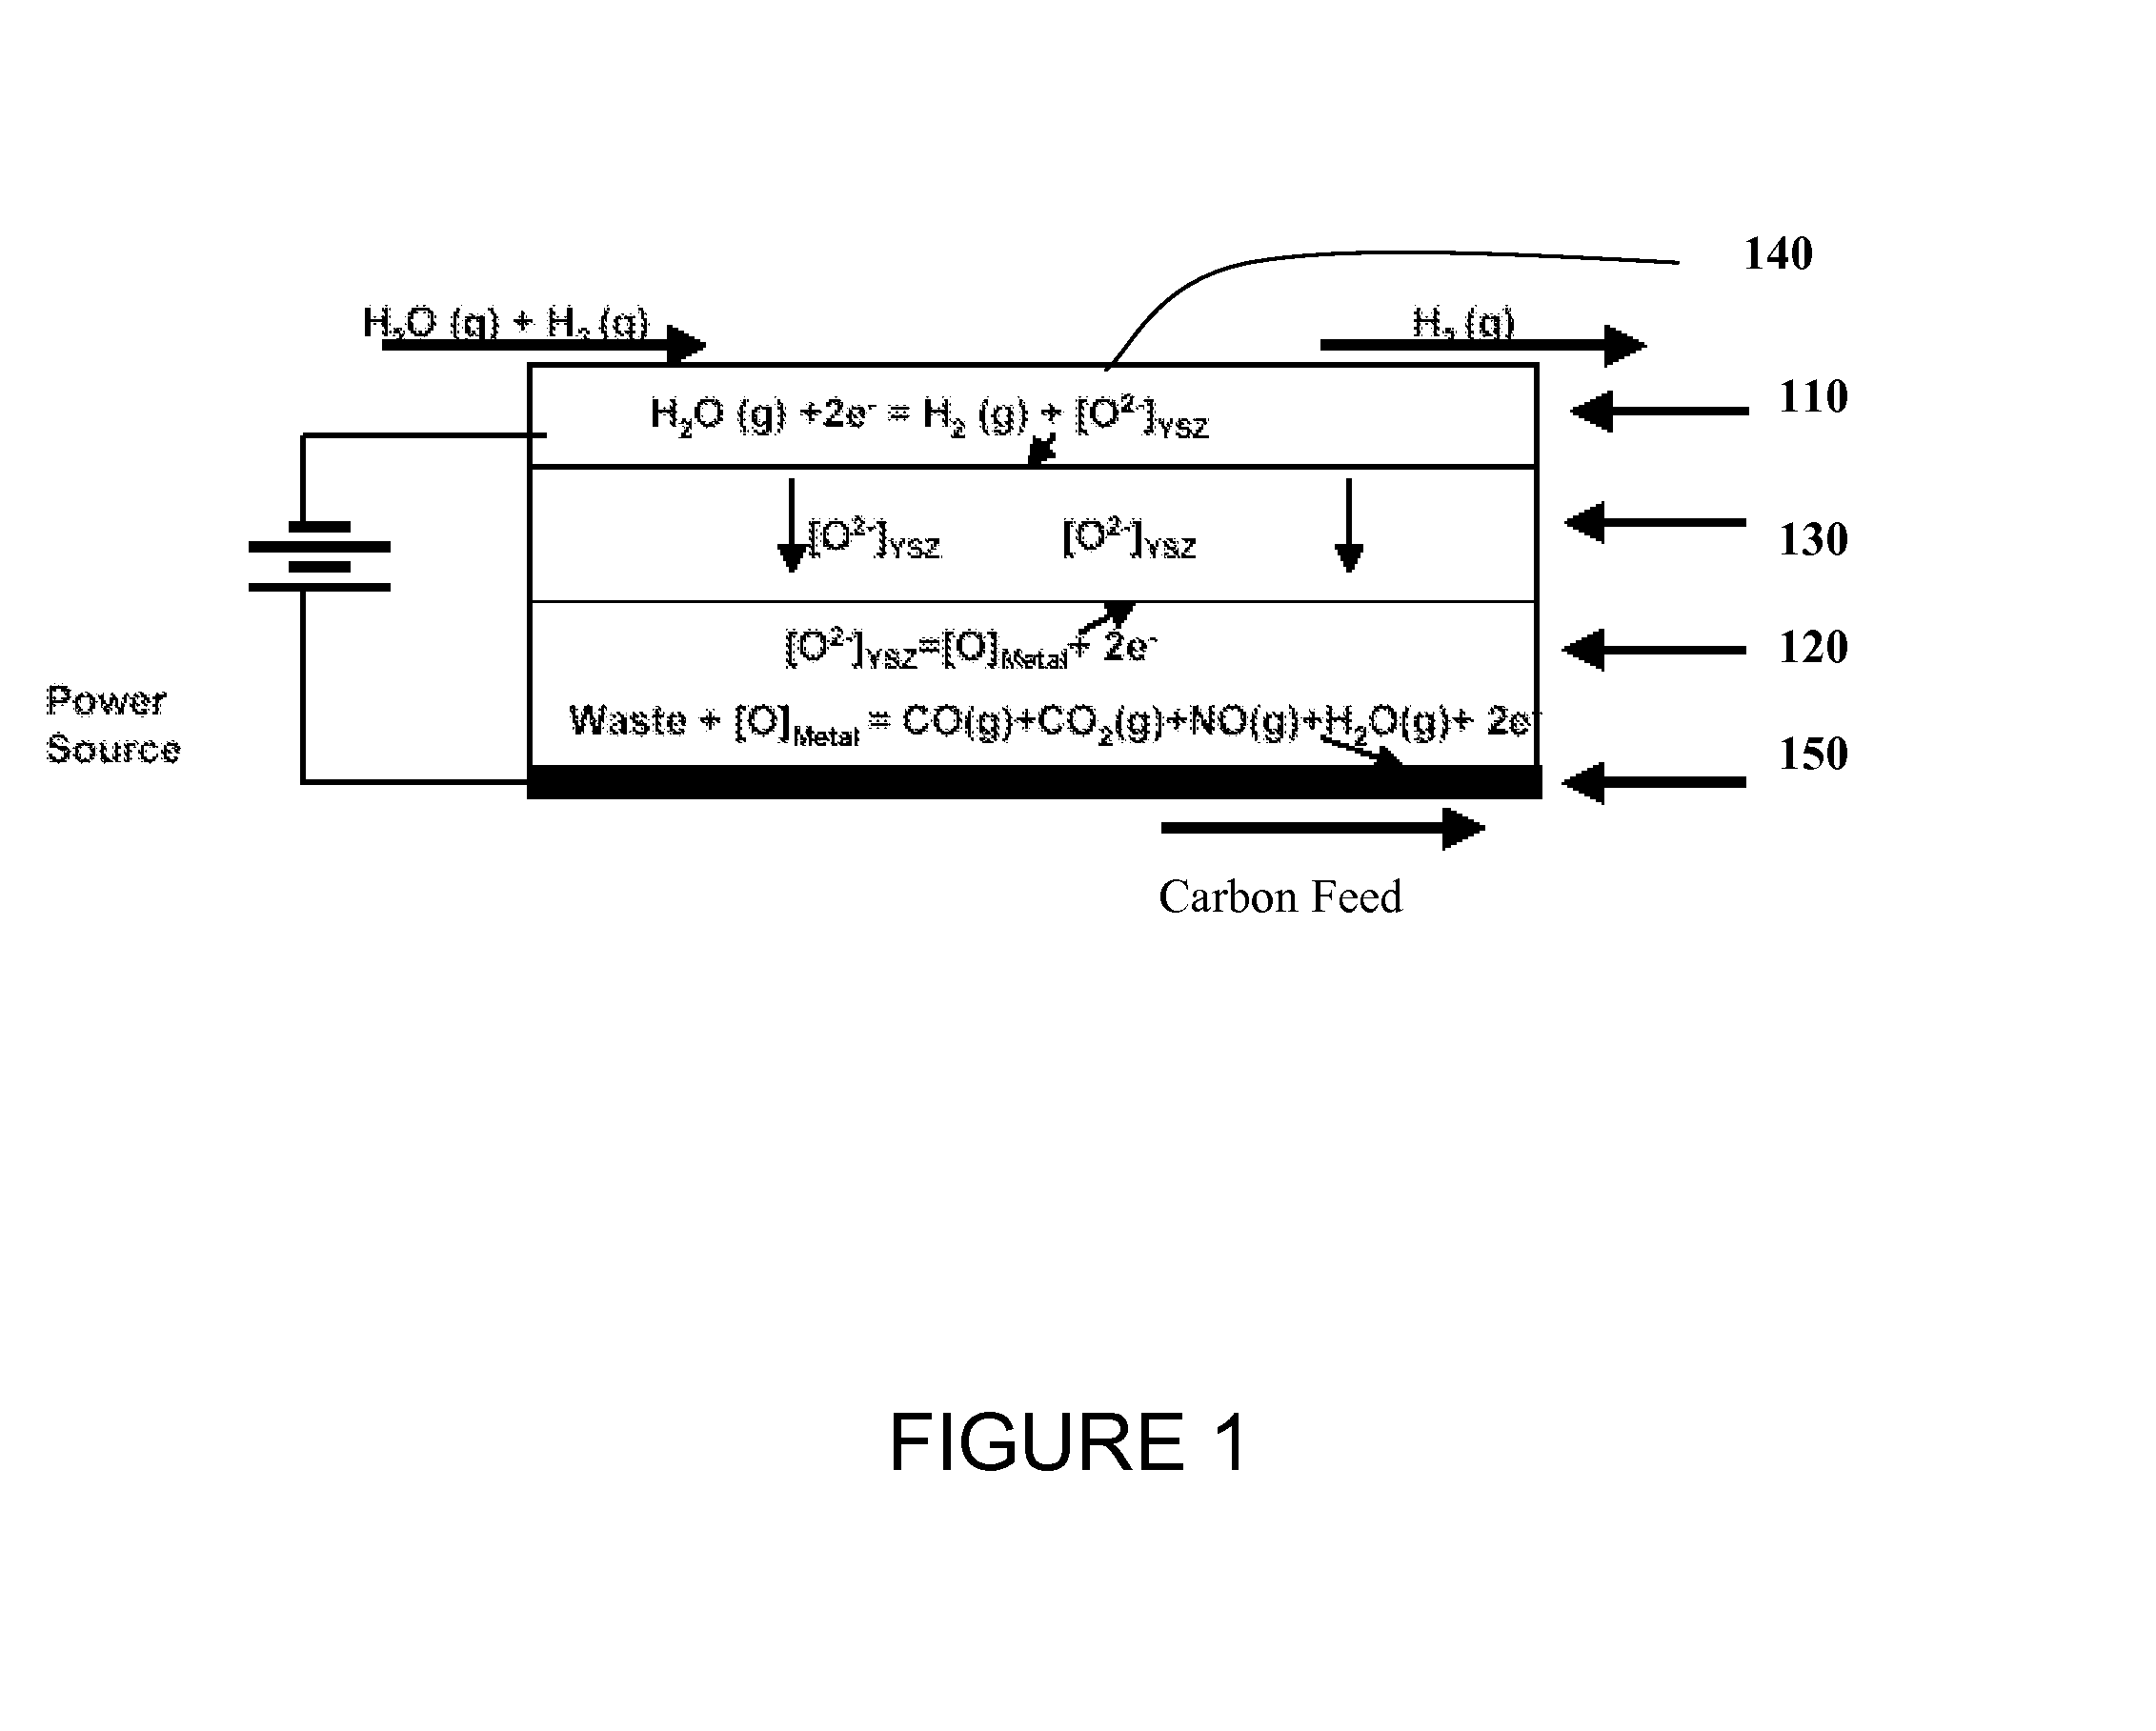 Waste to hydrogen conversion process and related apparatus